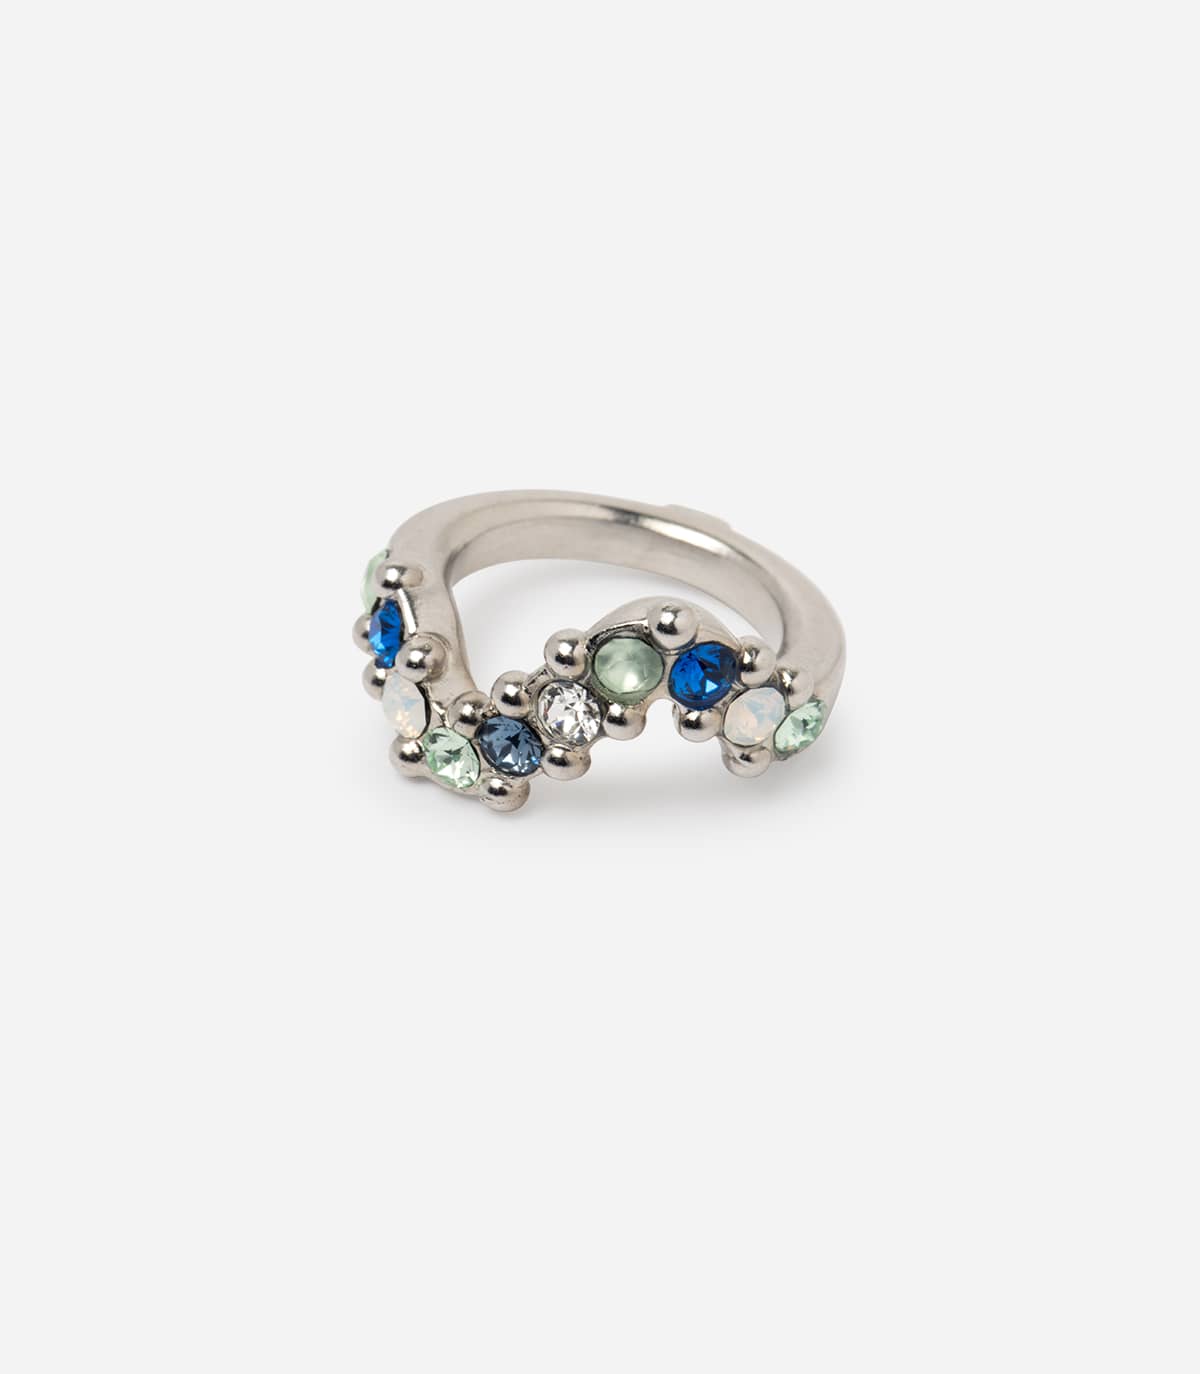 MOON JELLY PHALANX RING - Bague - Delphine-Charlotte Parmentier